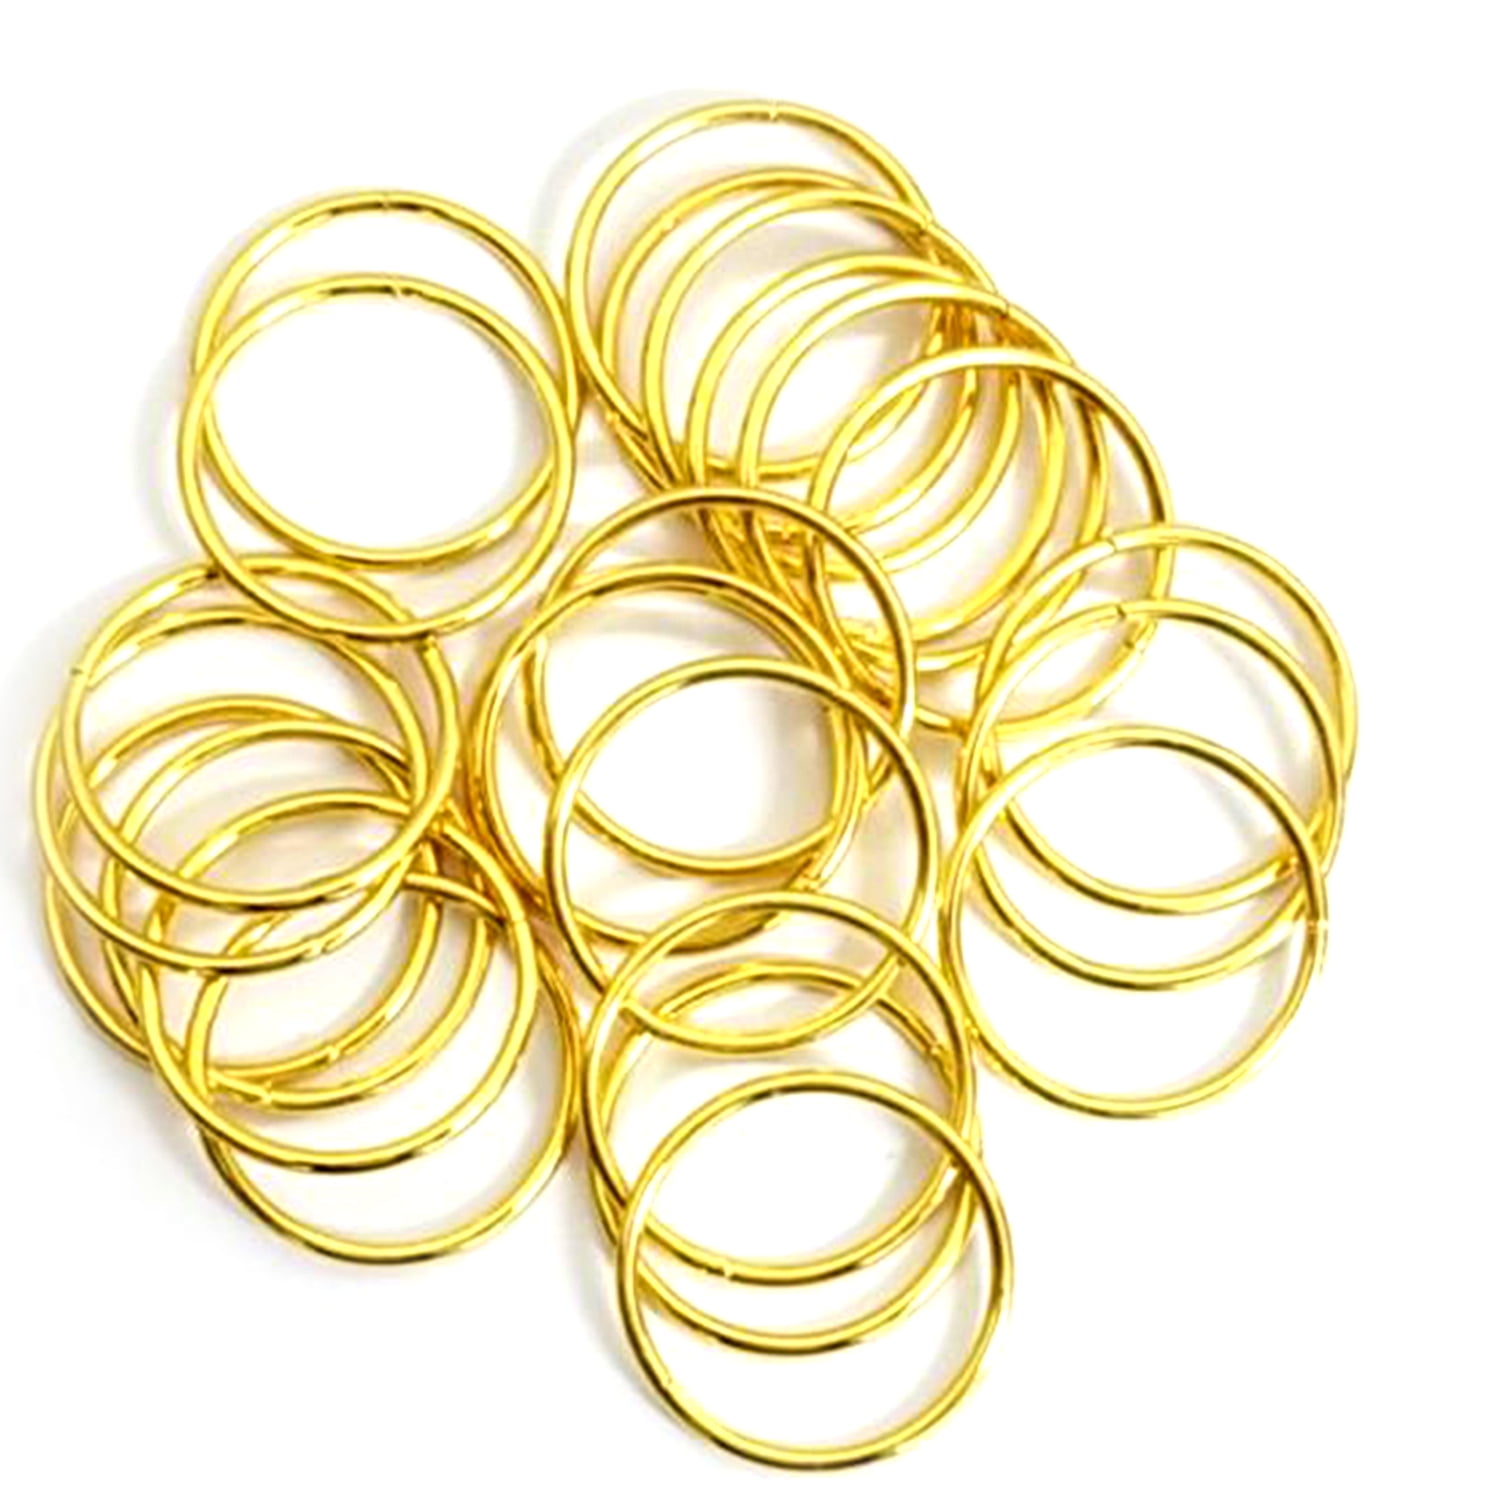 6 Pieces 20 Cm Metal Rings For Crafting Gold Made Of 3 Mm Metal